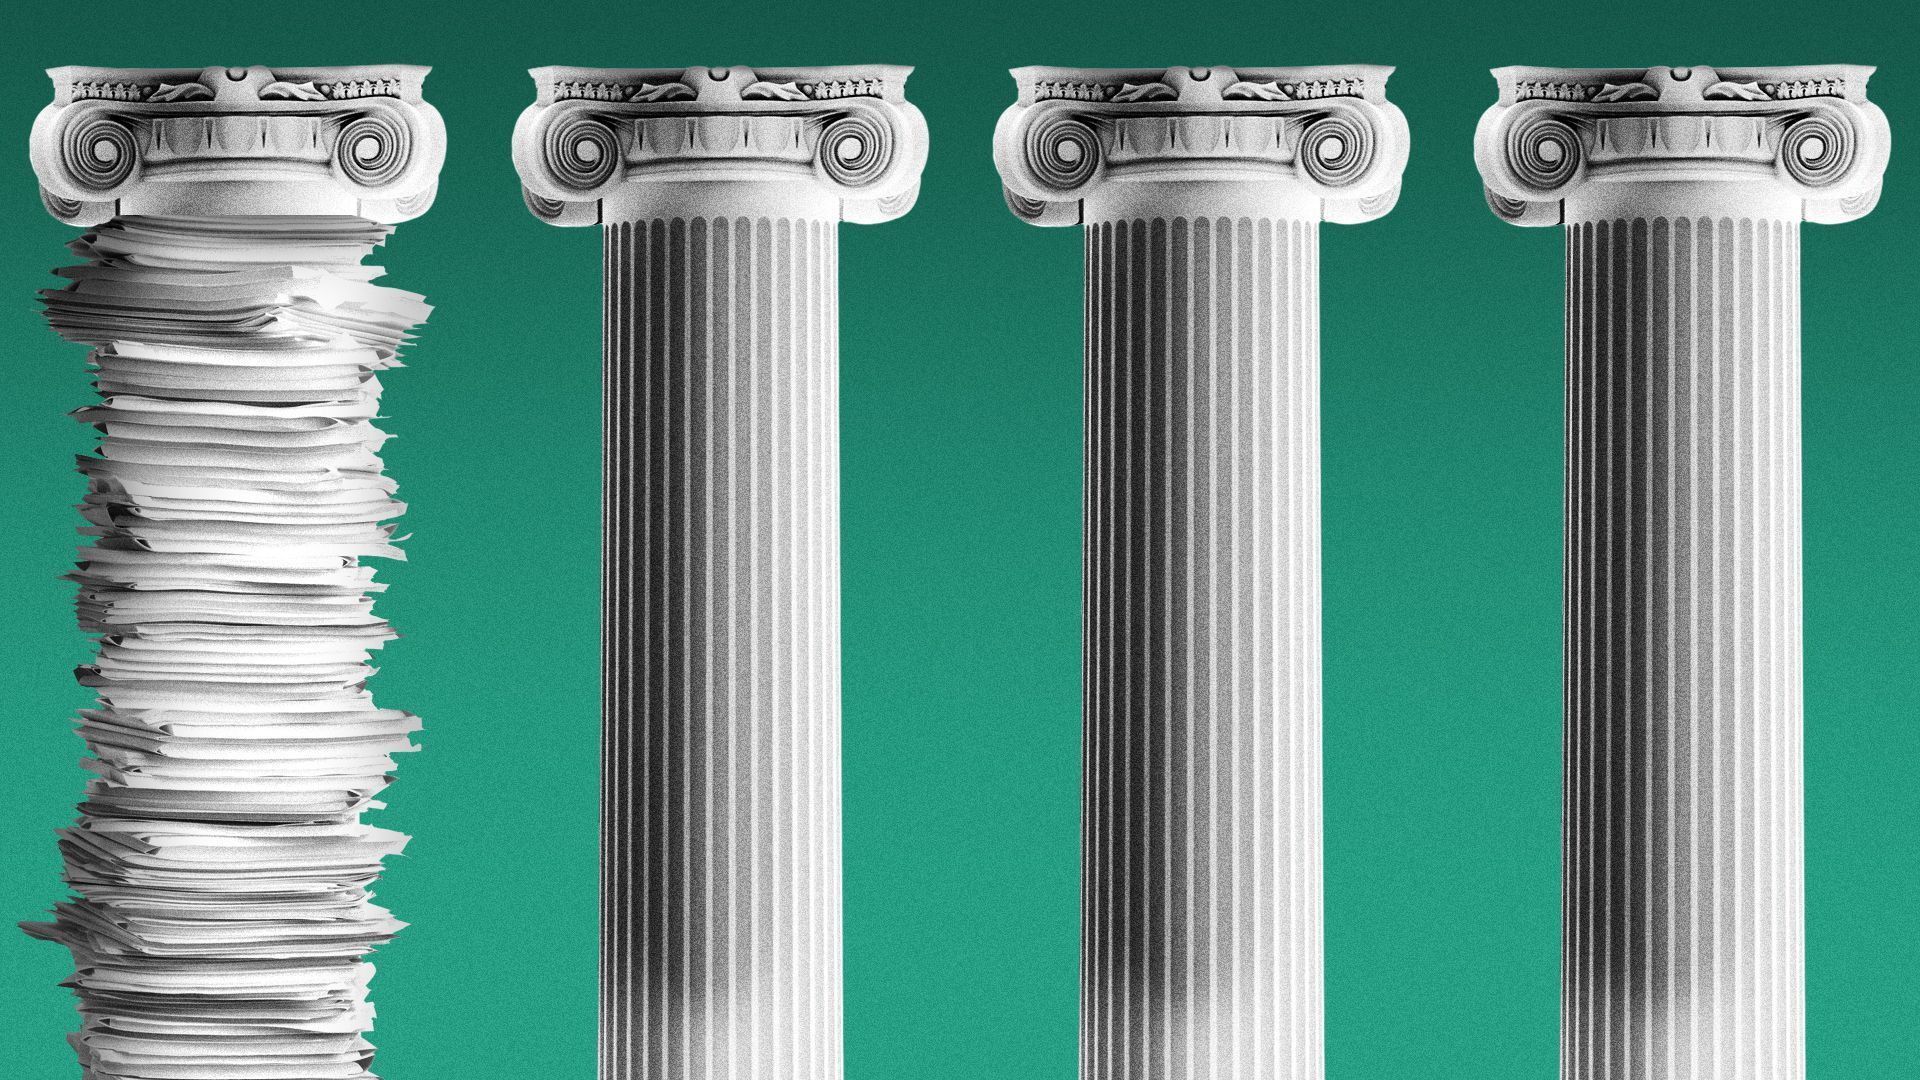 Illustration of four pillars, one made from a tall stack of papers.